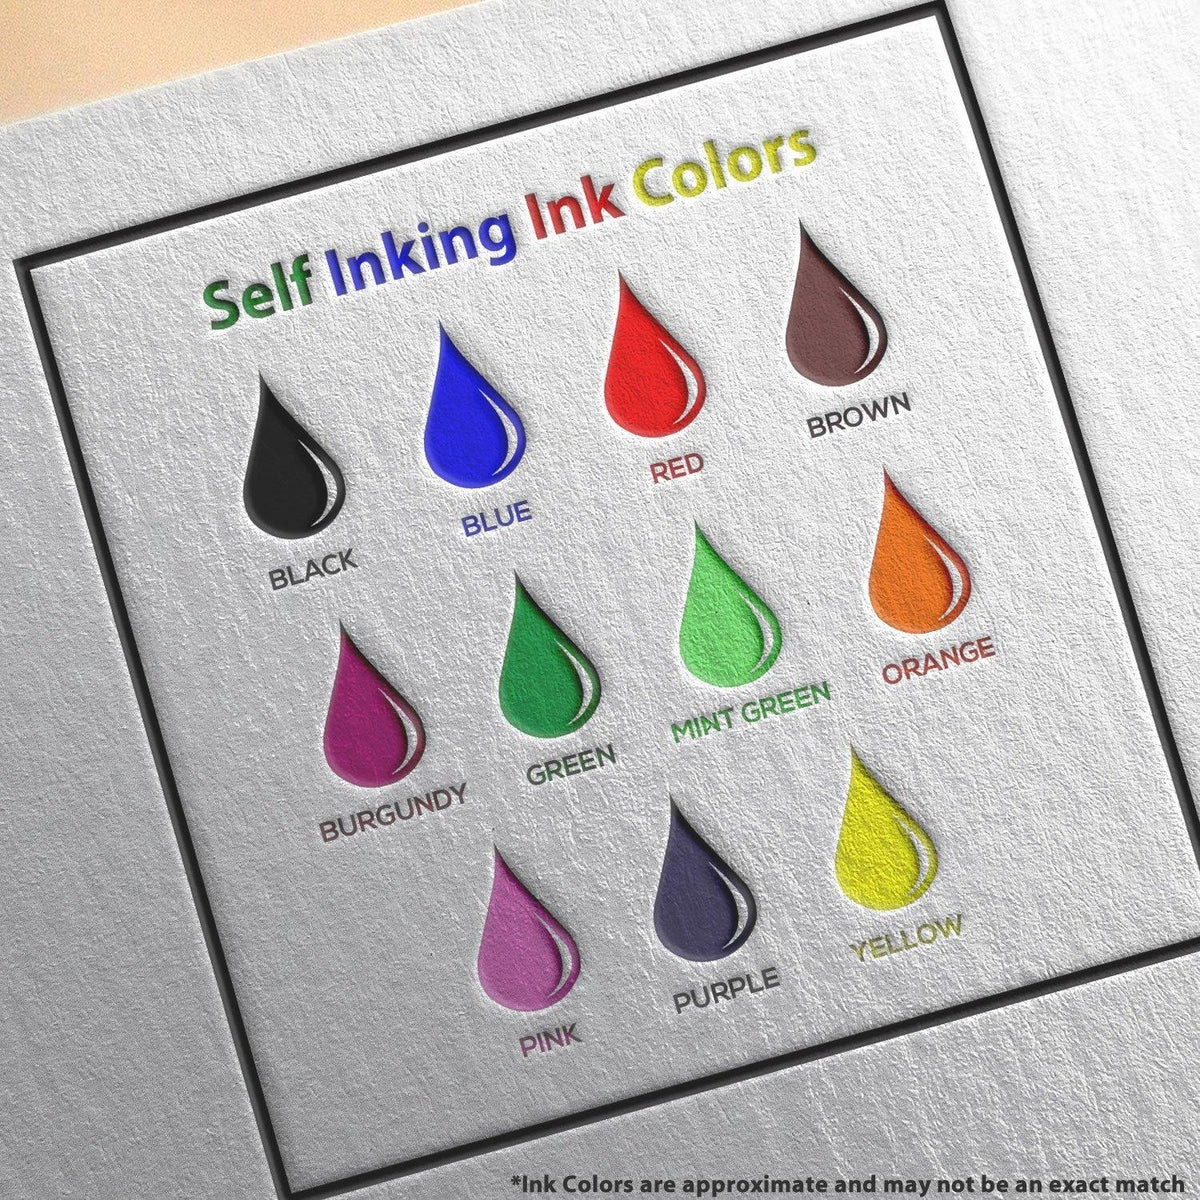 Self-Inking First Class Mail International Stamp - Engineer Seal Stamps - Brand_Trodat, Impression Size_Small, Stamp Type_Self-Inking Stamp, Type of Use_Postal &amp; Mailing